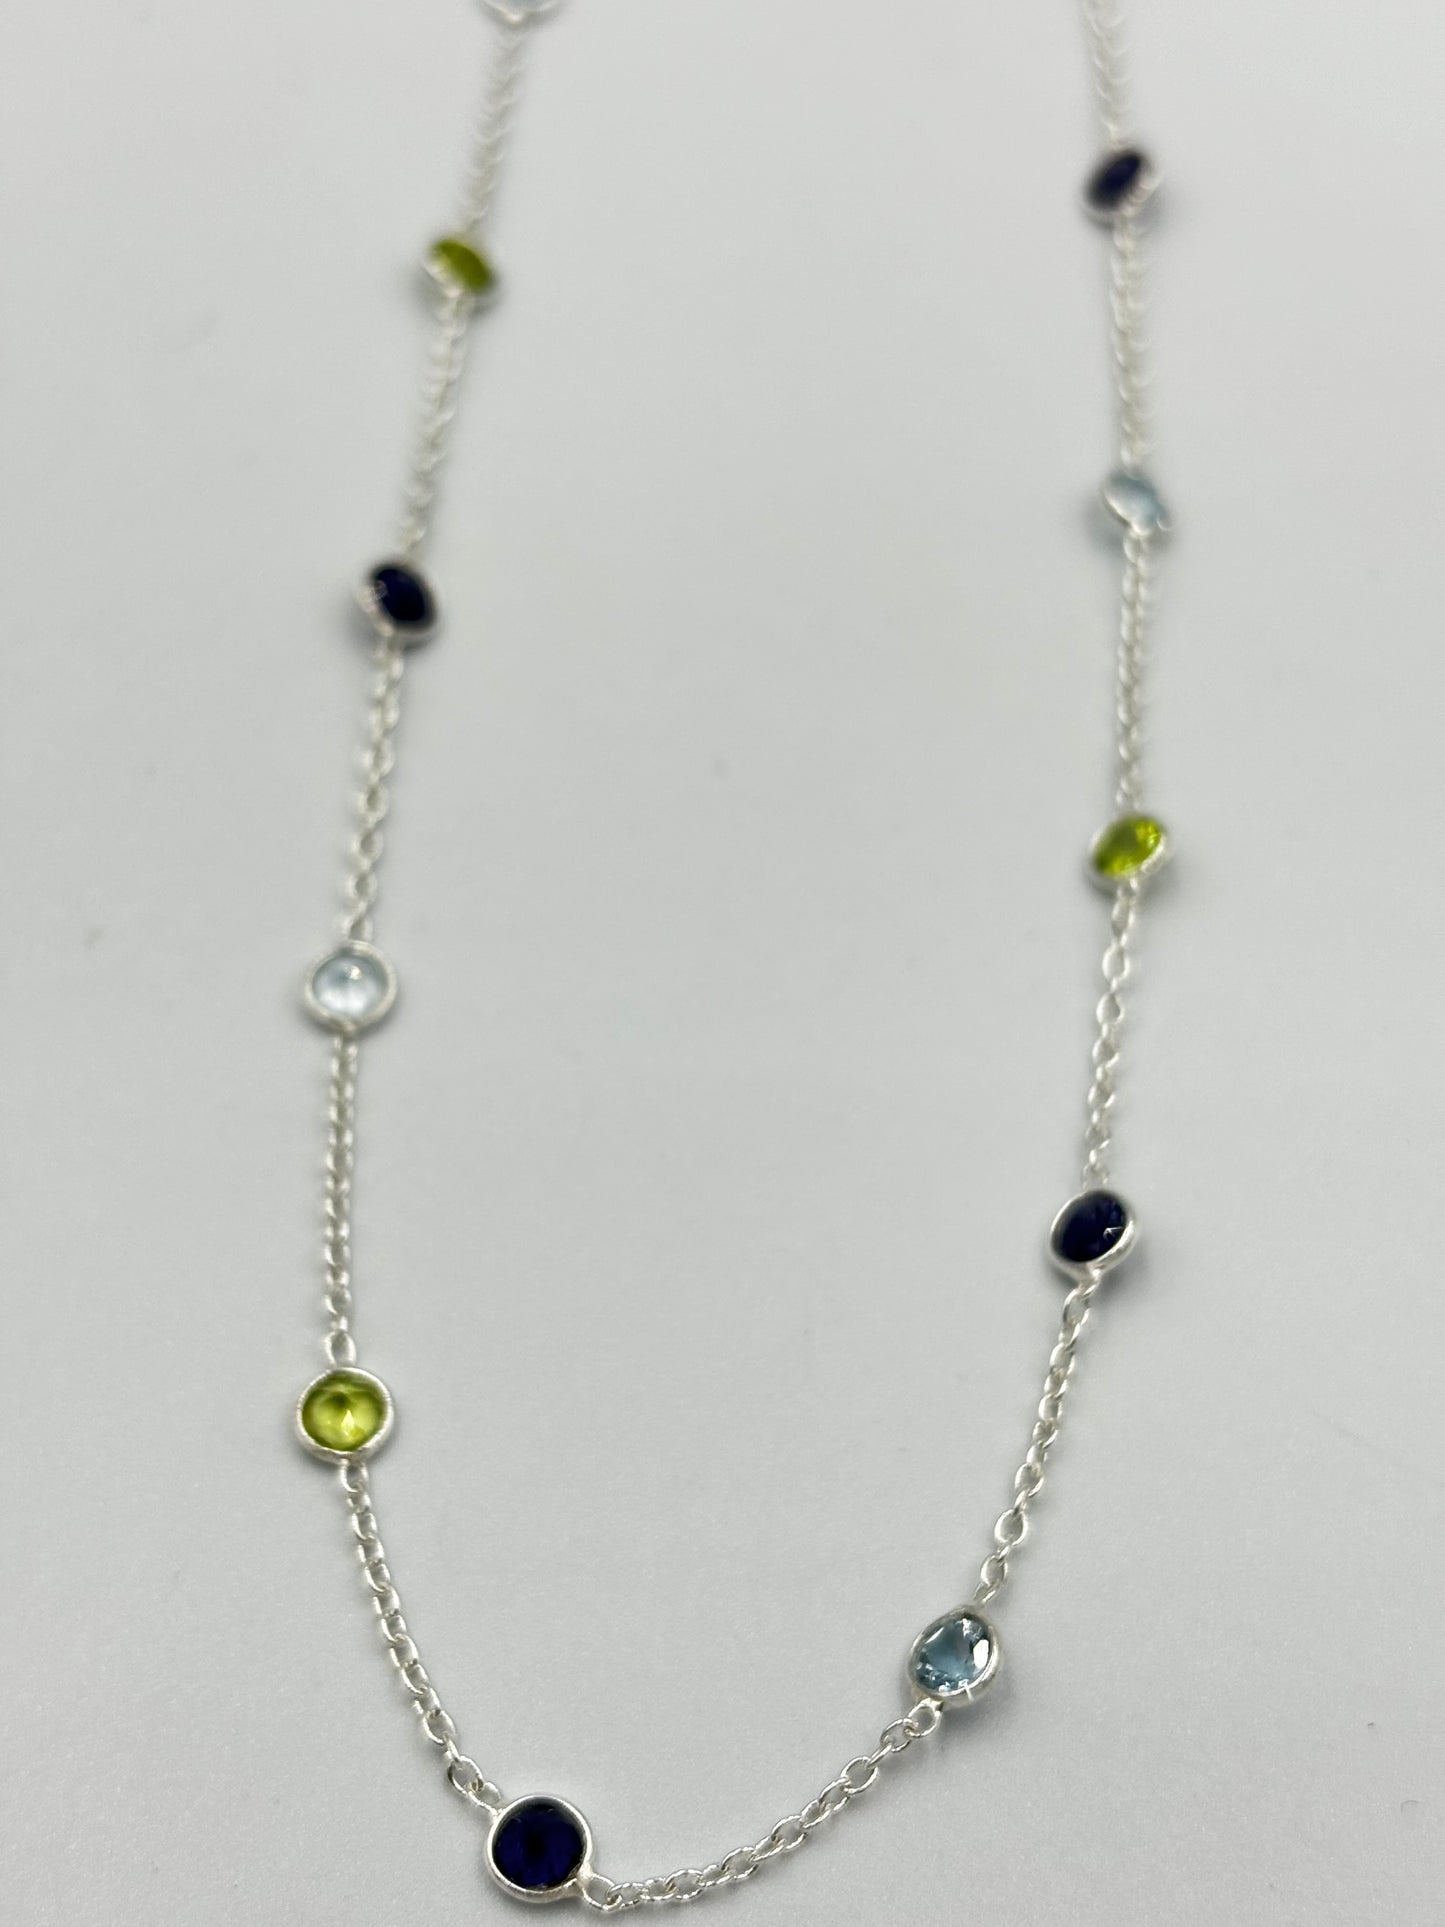 Sterling silver necklace with 5mm Peridot, Blue Topaz and Iol semi precious stones in-bedded in necklace